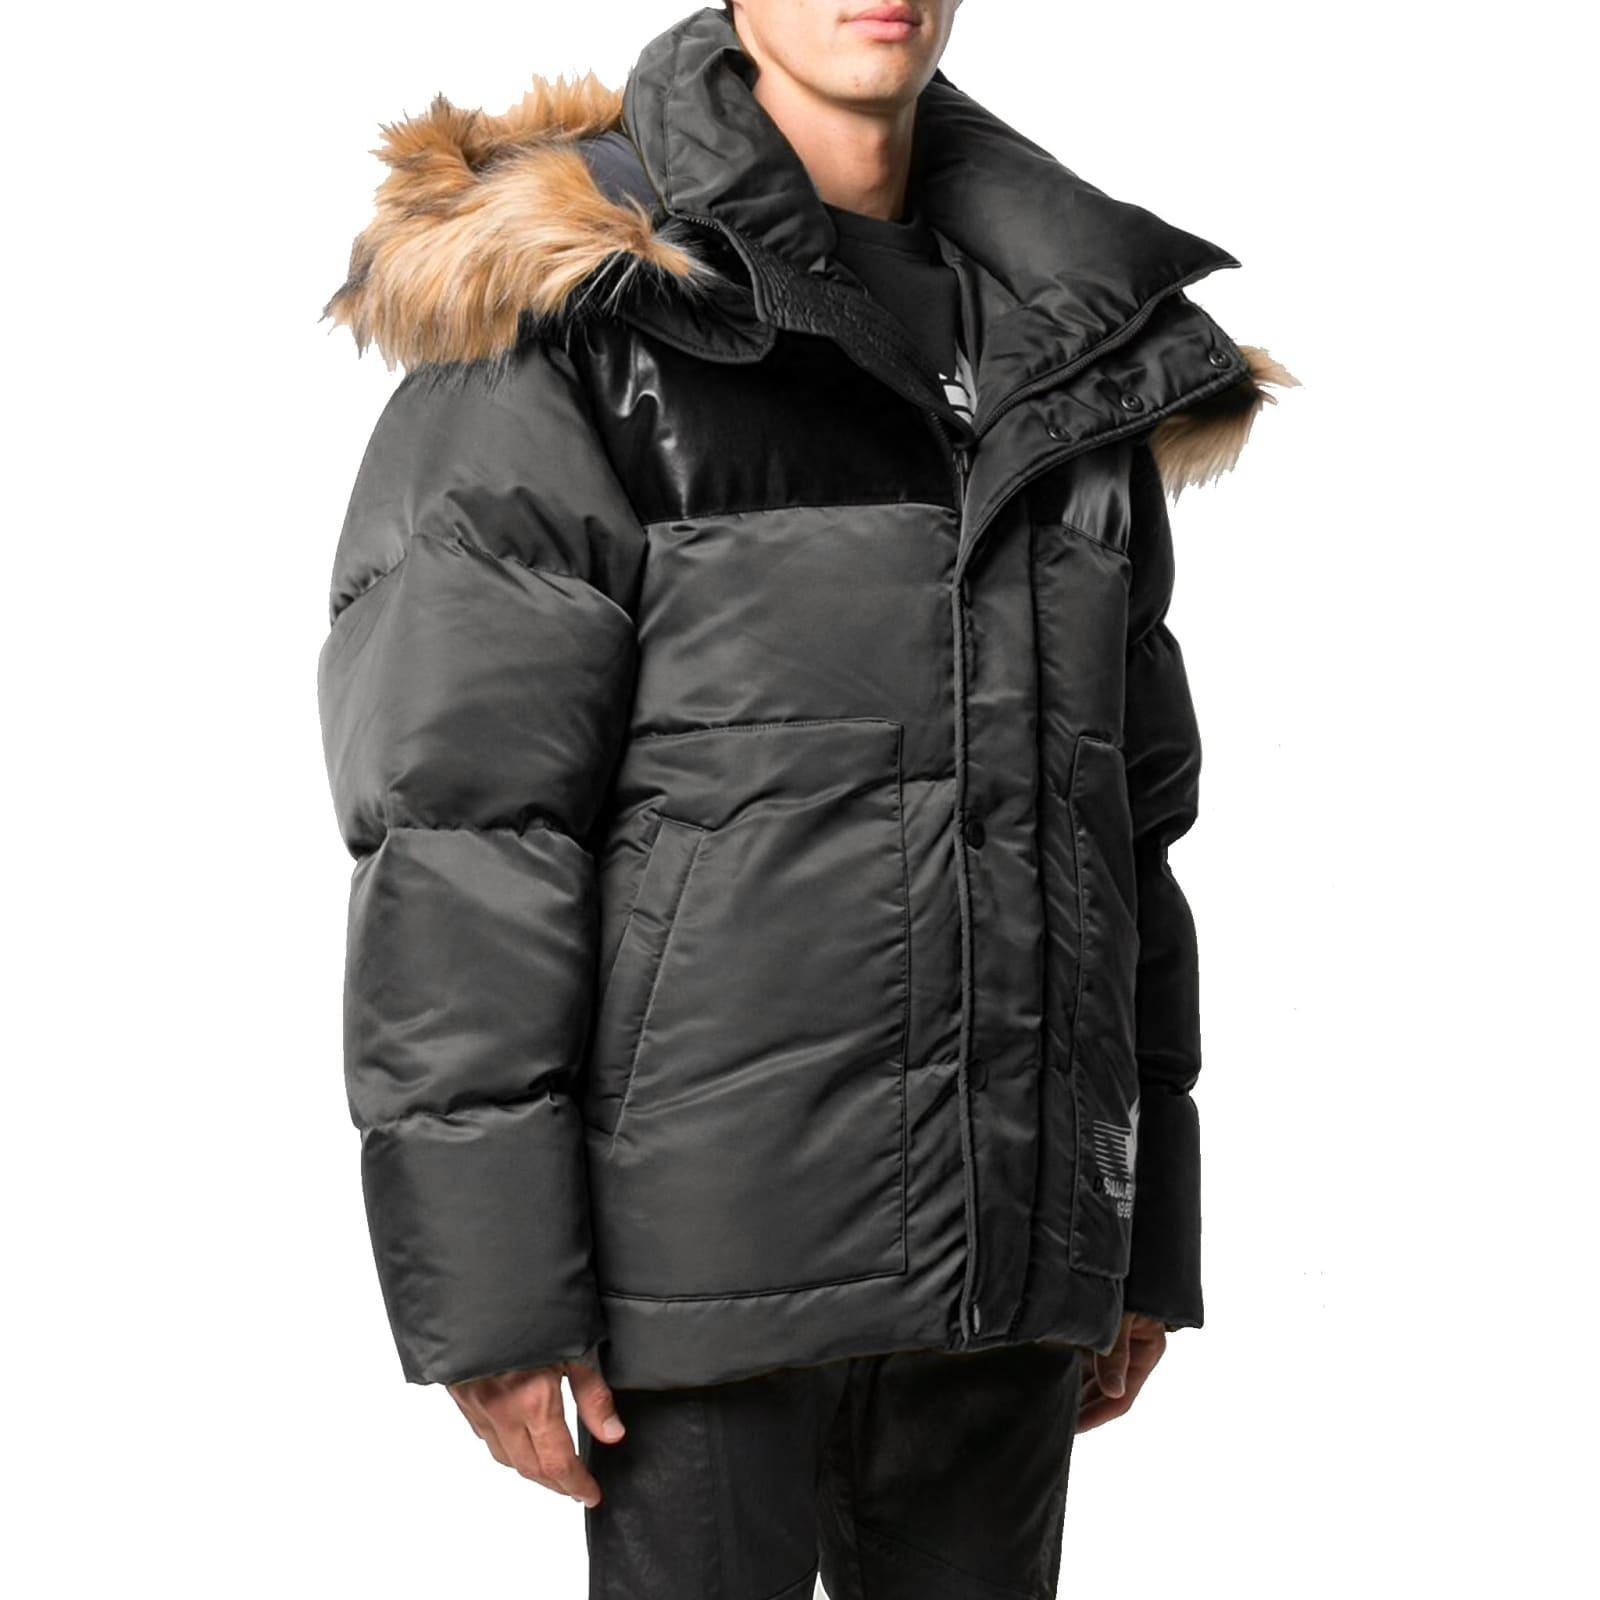 Off-White Patches Padded Jacket, $1,620, farfetch.com